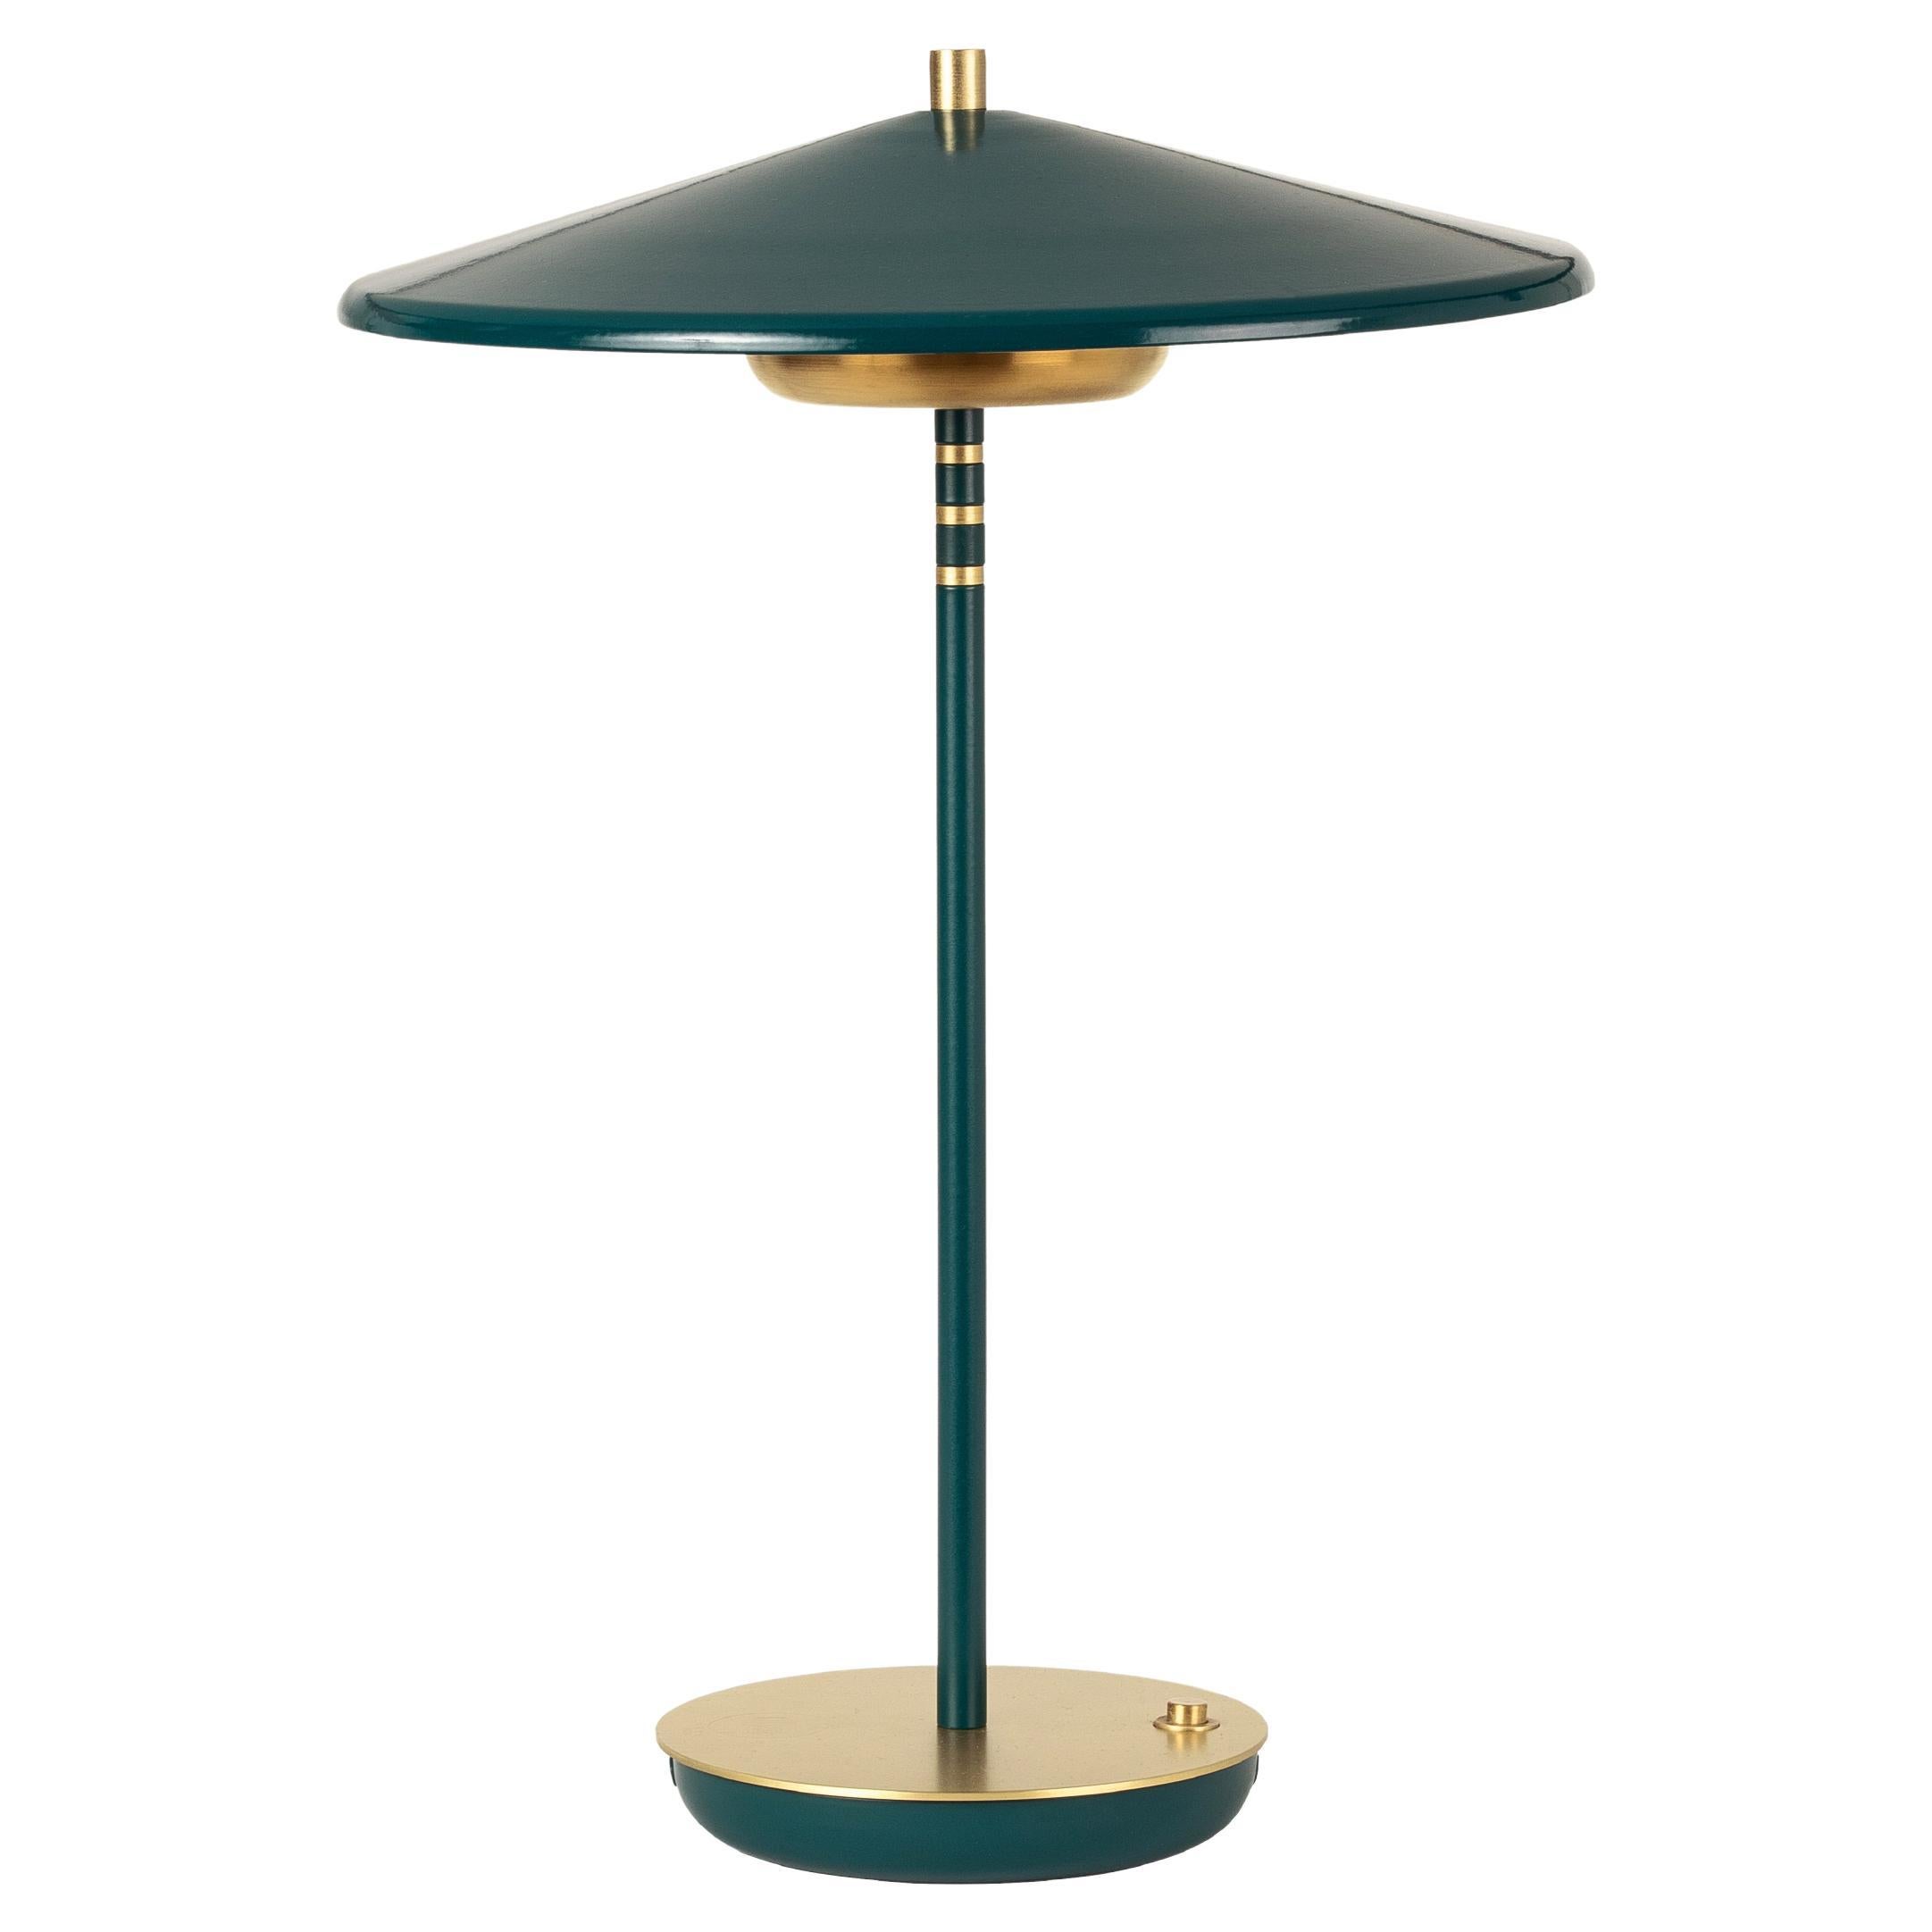 Materials: brass (satine finish), iron (with electrostatic paint)
Plug Type: EU Plug (US converter is provided)
Voltage: 110-240V
Bulb: 3 WATT integrated LED
Light Color: 2700K

The serie is inspired by hanging French berets on 1920s hat store